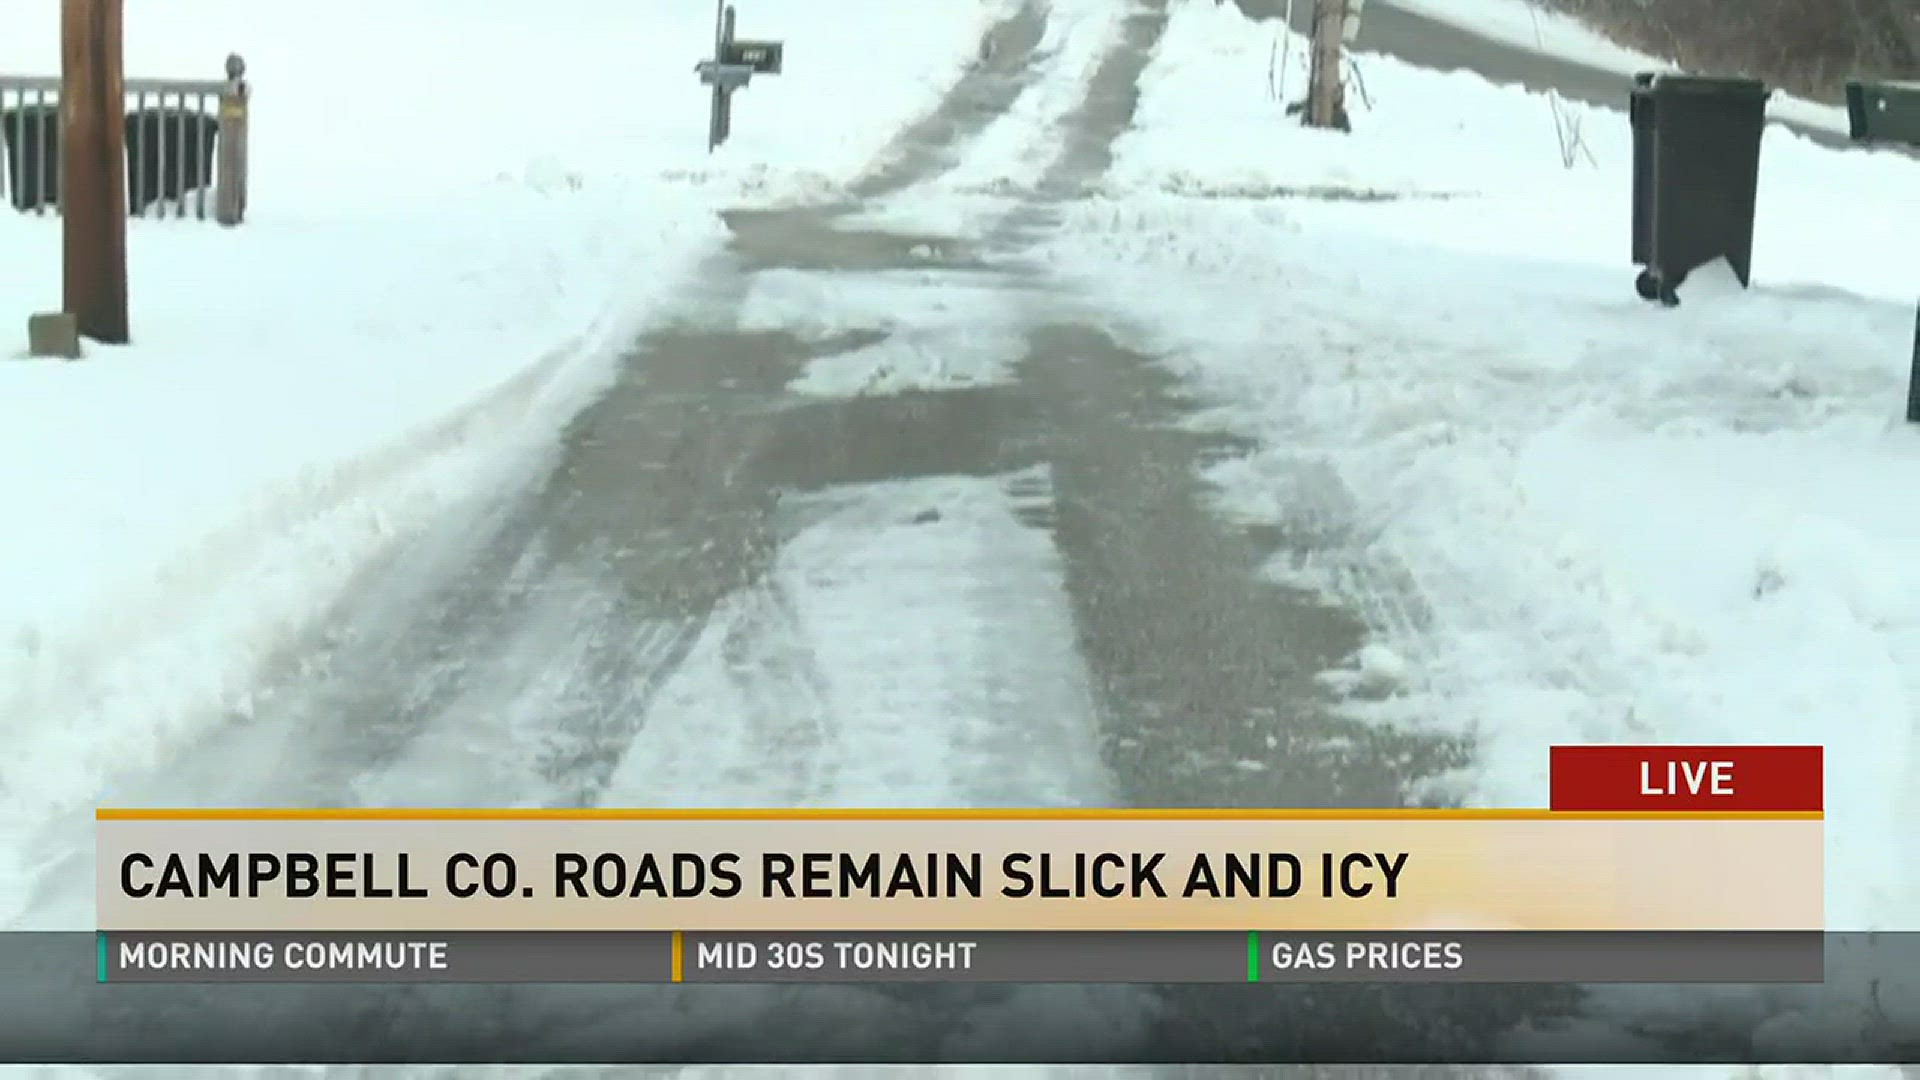 Roads are still slick in Campbell County after winter storms over the weekend.